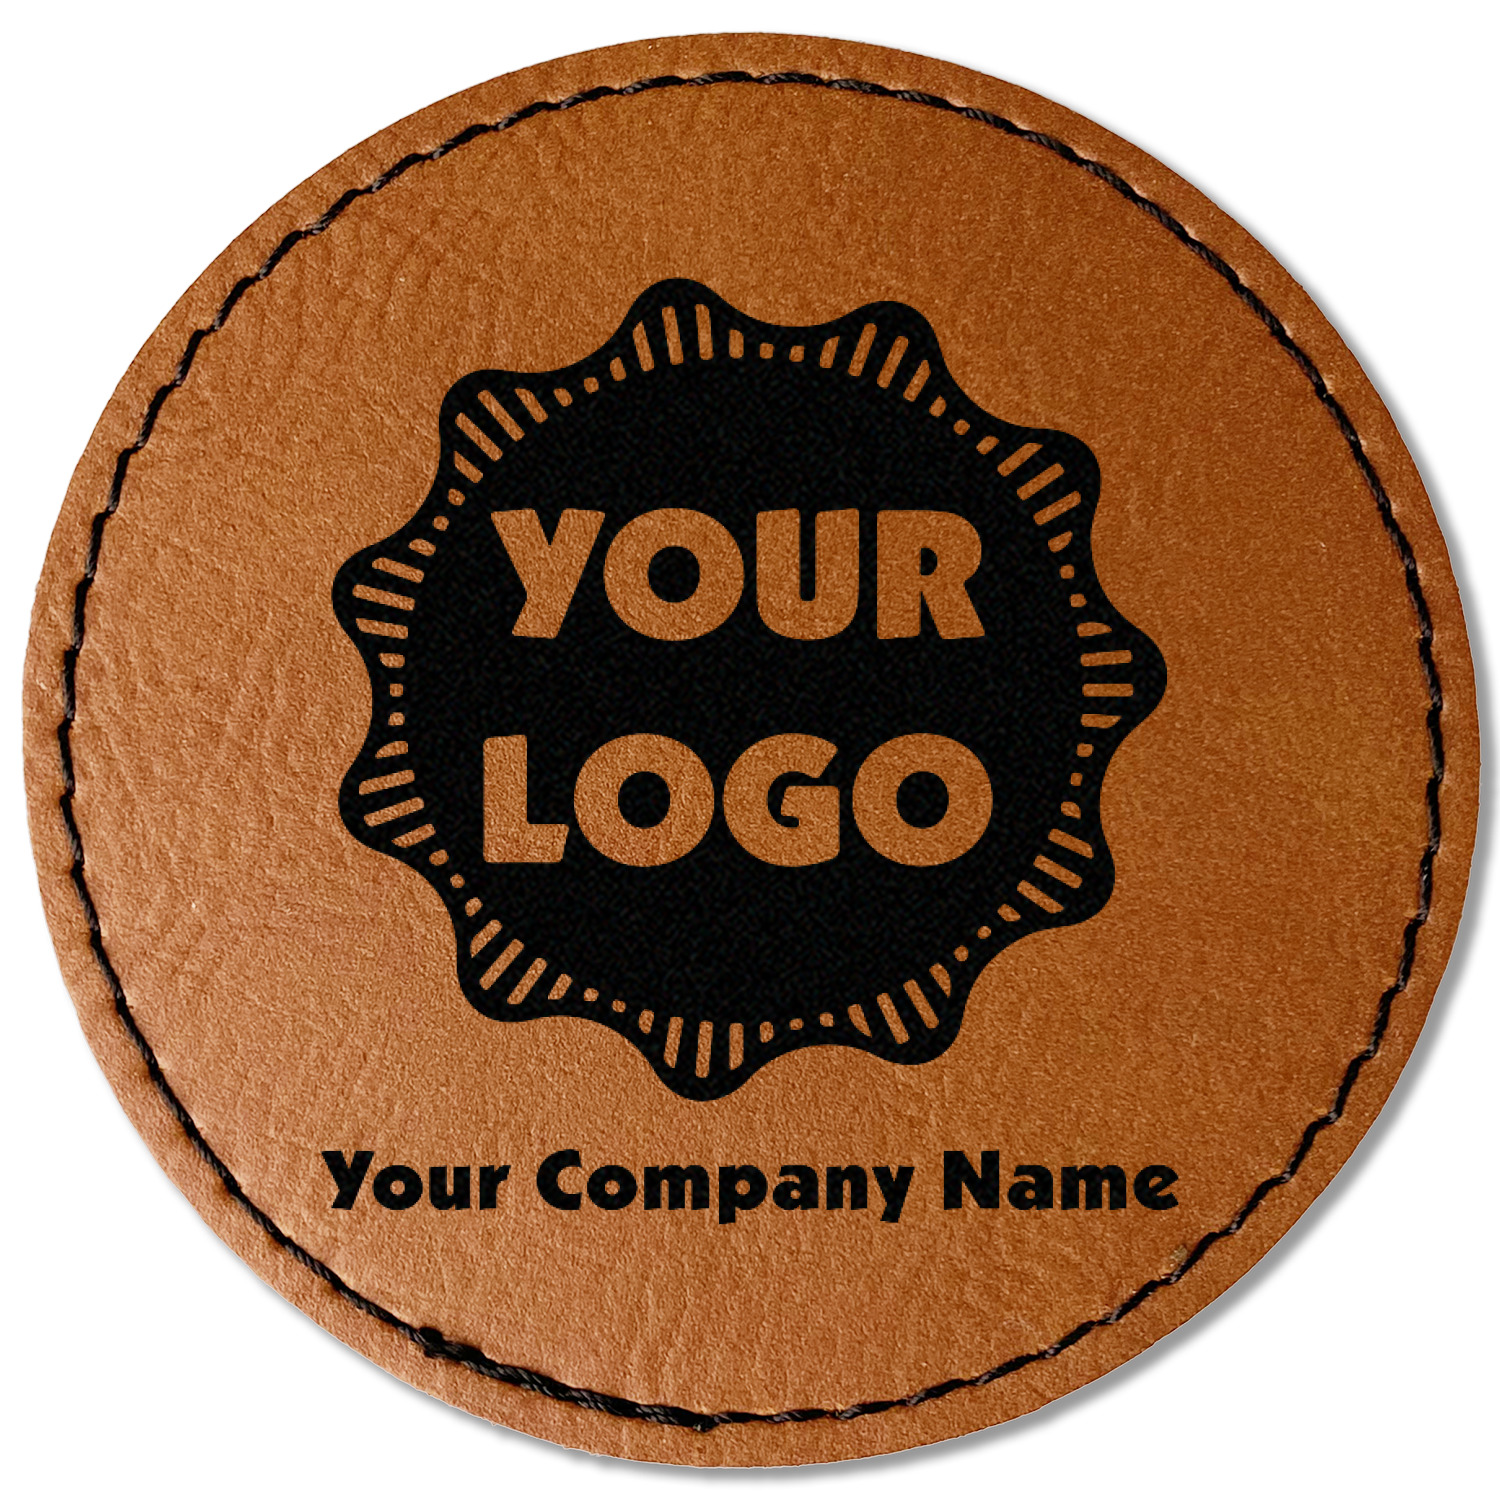 Bulk Custom Engraved Leatherette Patches with Adhesive Backing for  Promotional Items and Business Branding